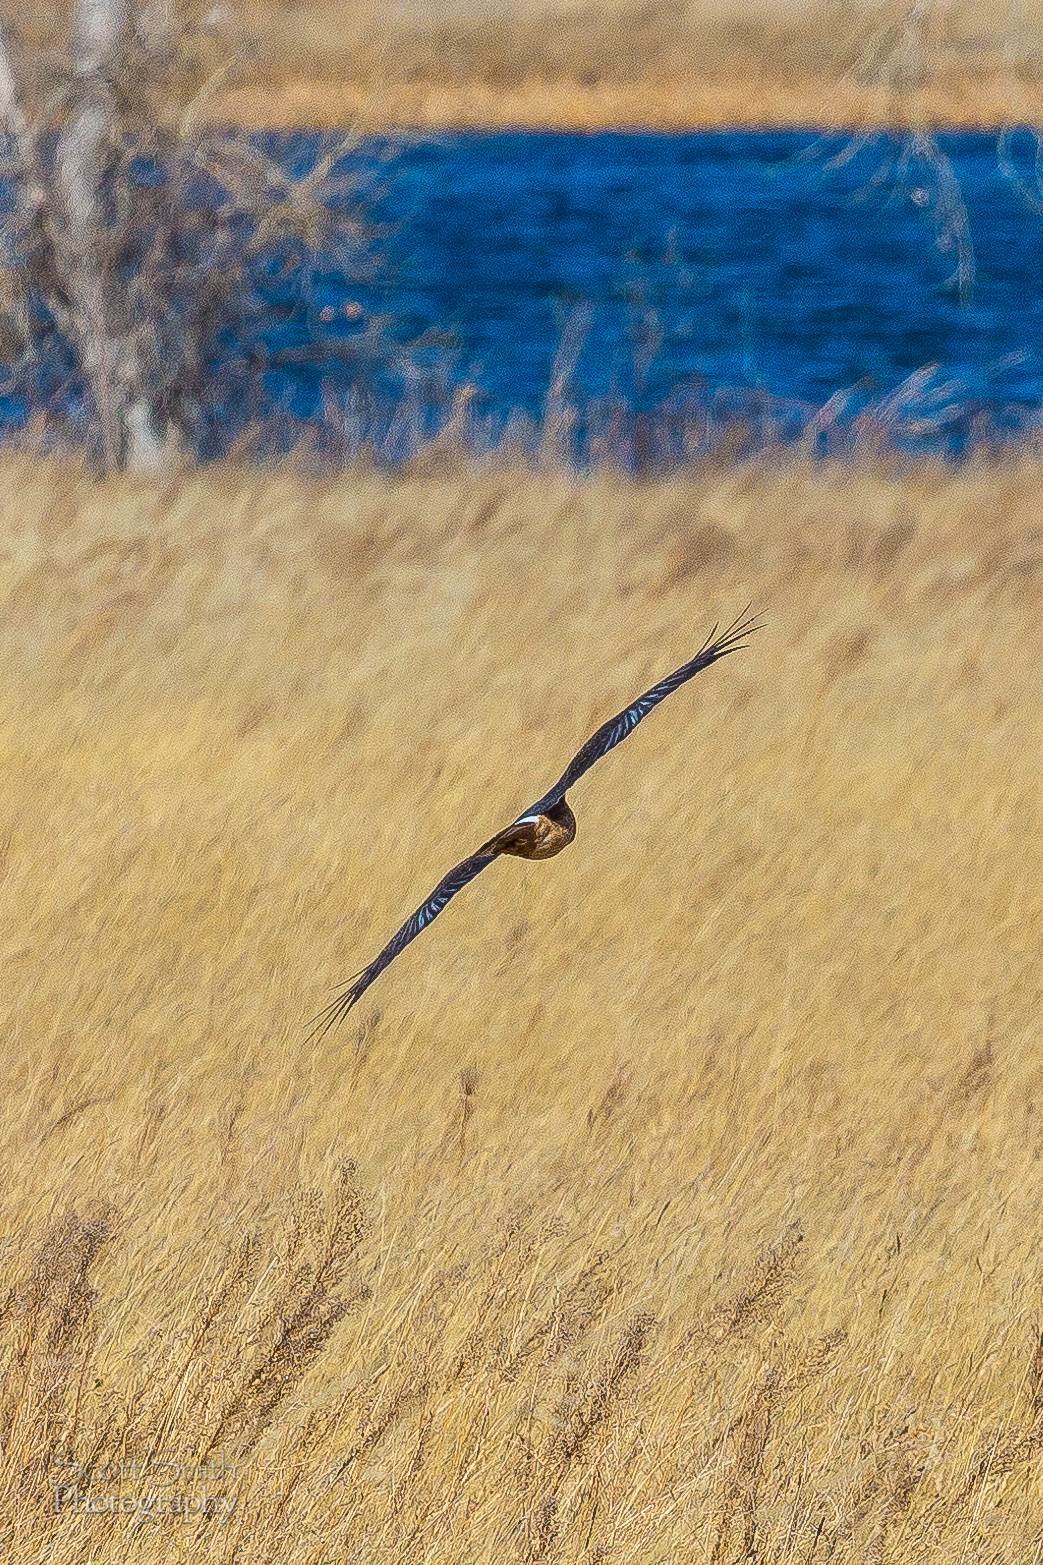 Marsh Hawk 3  - A marsh hawk glides over the grass at the Rocky Mountain Arsenal Wildlife Refuge. by Scott Smith Photos